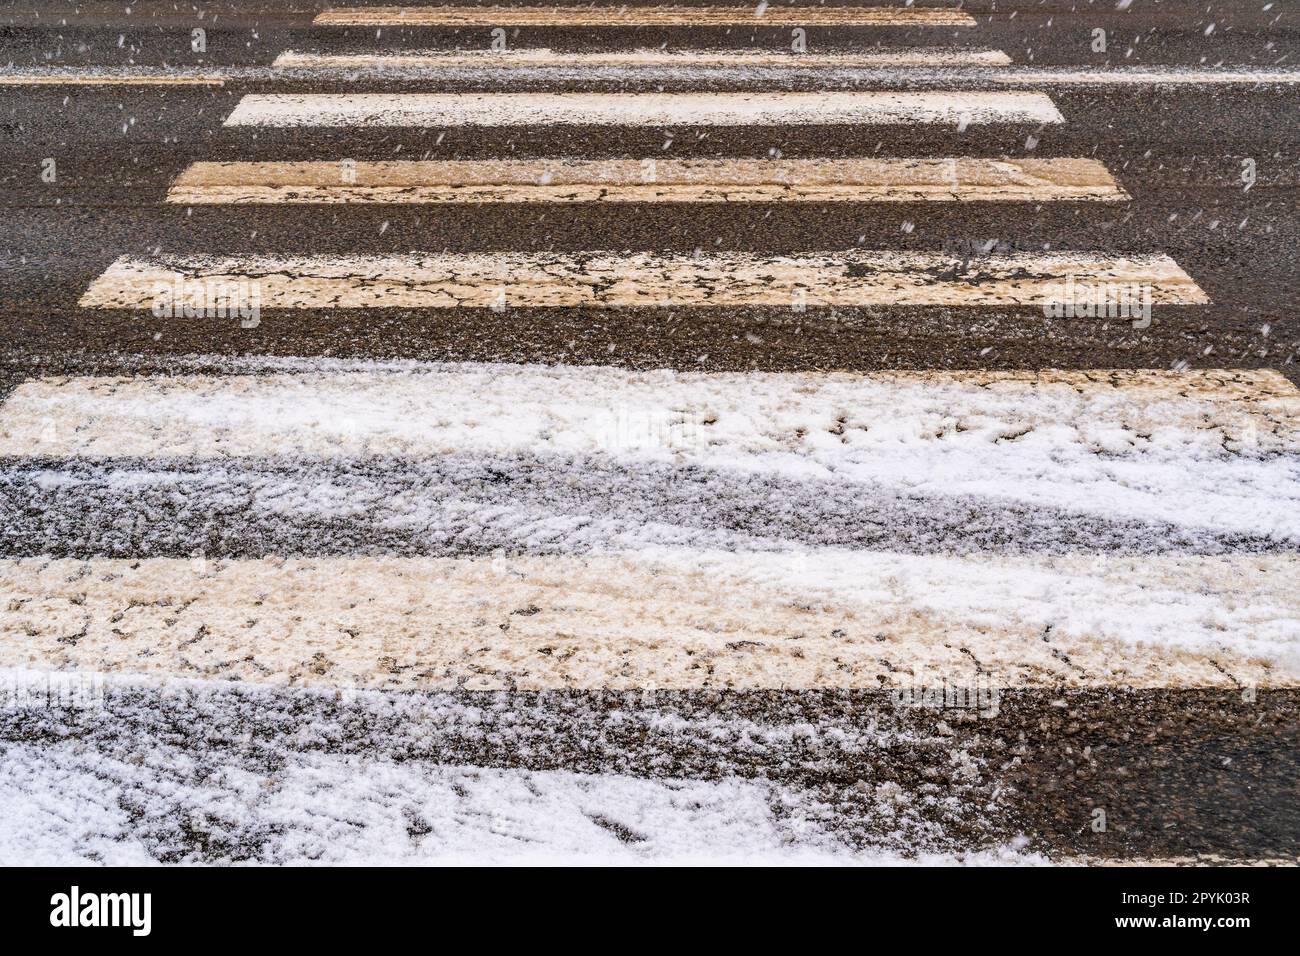 Snow, ice, and winter mud at a pedestrian crossing Stock Photo